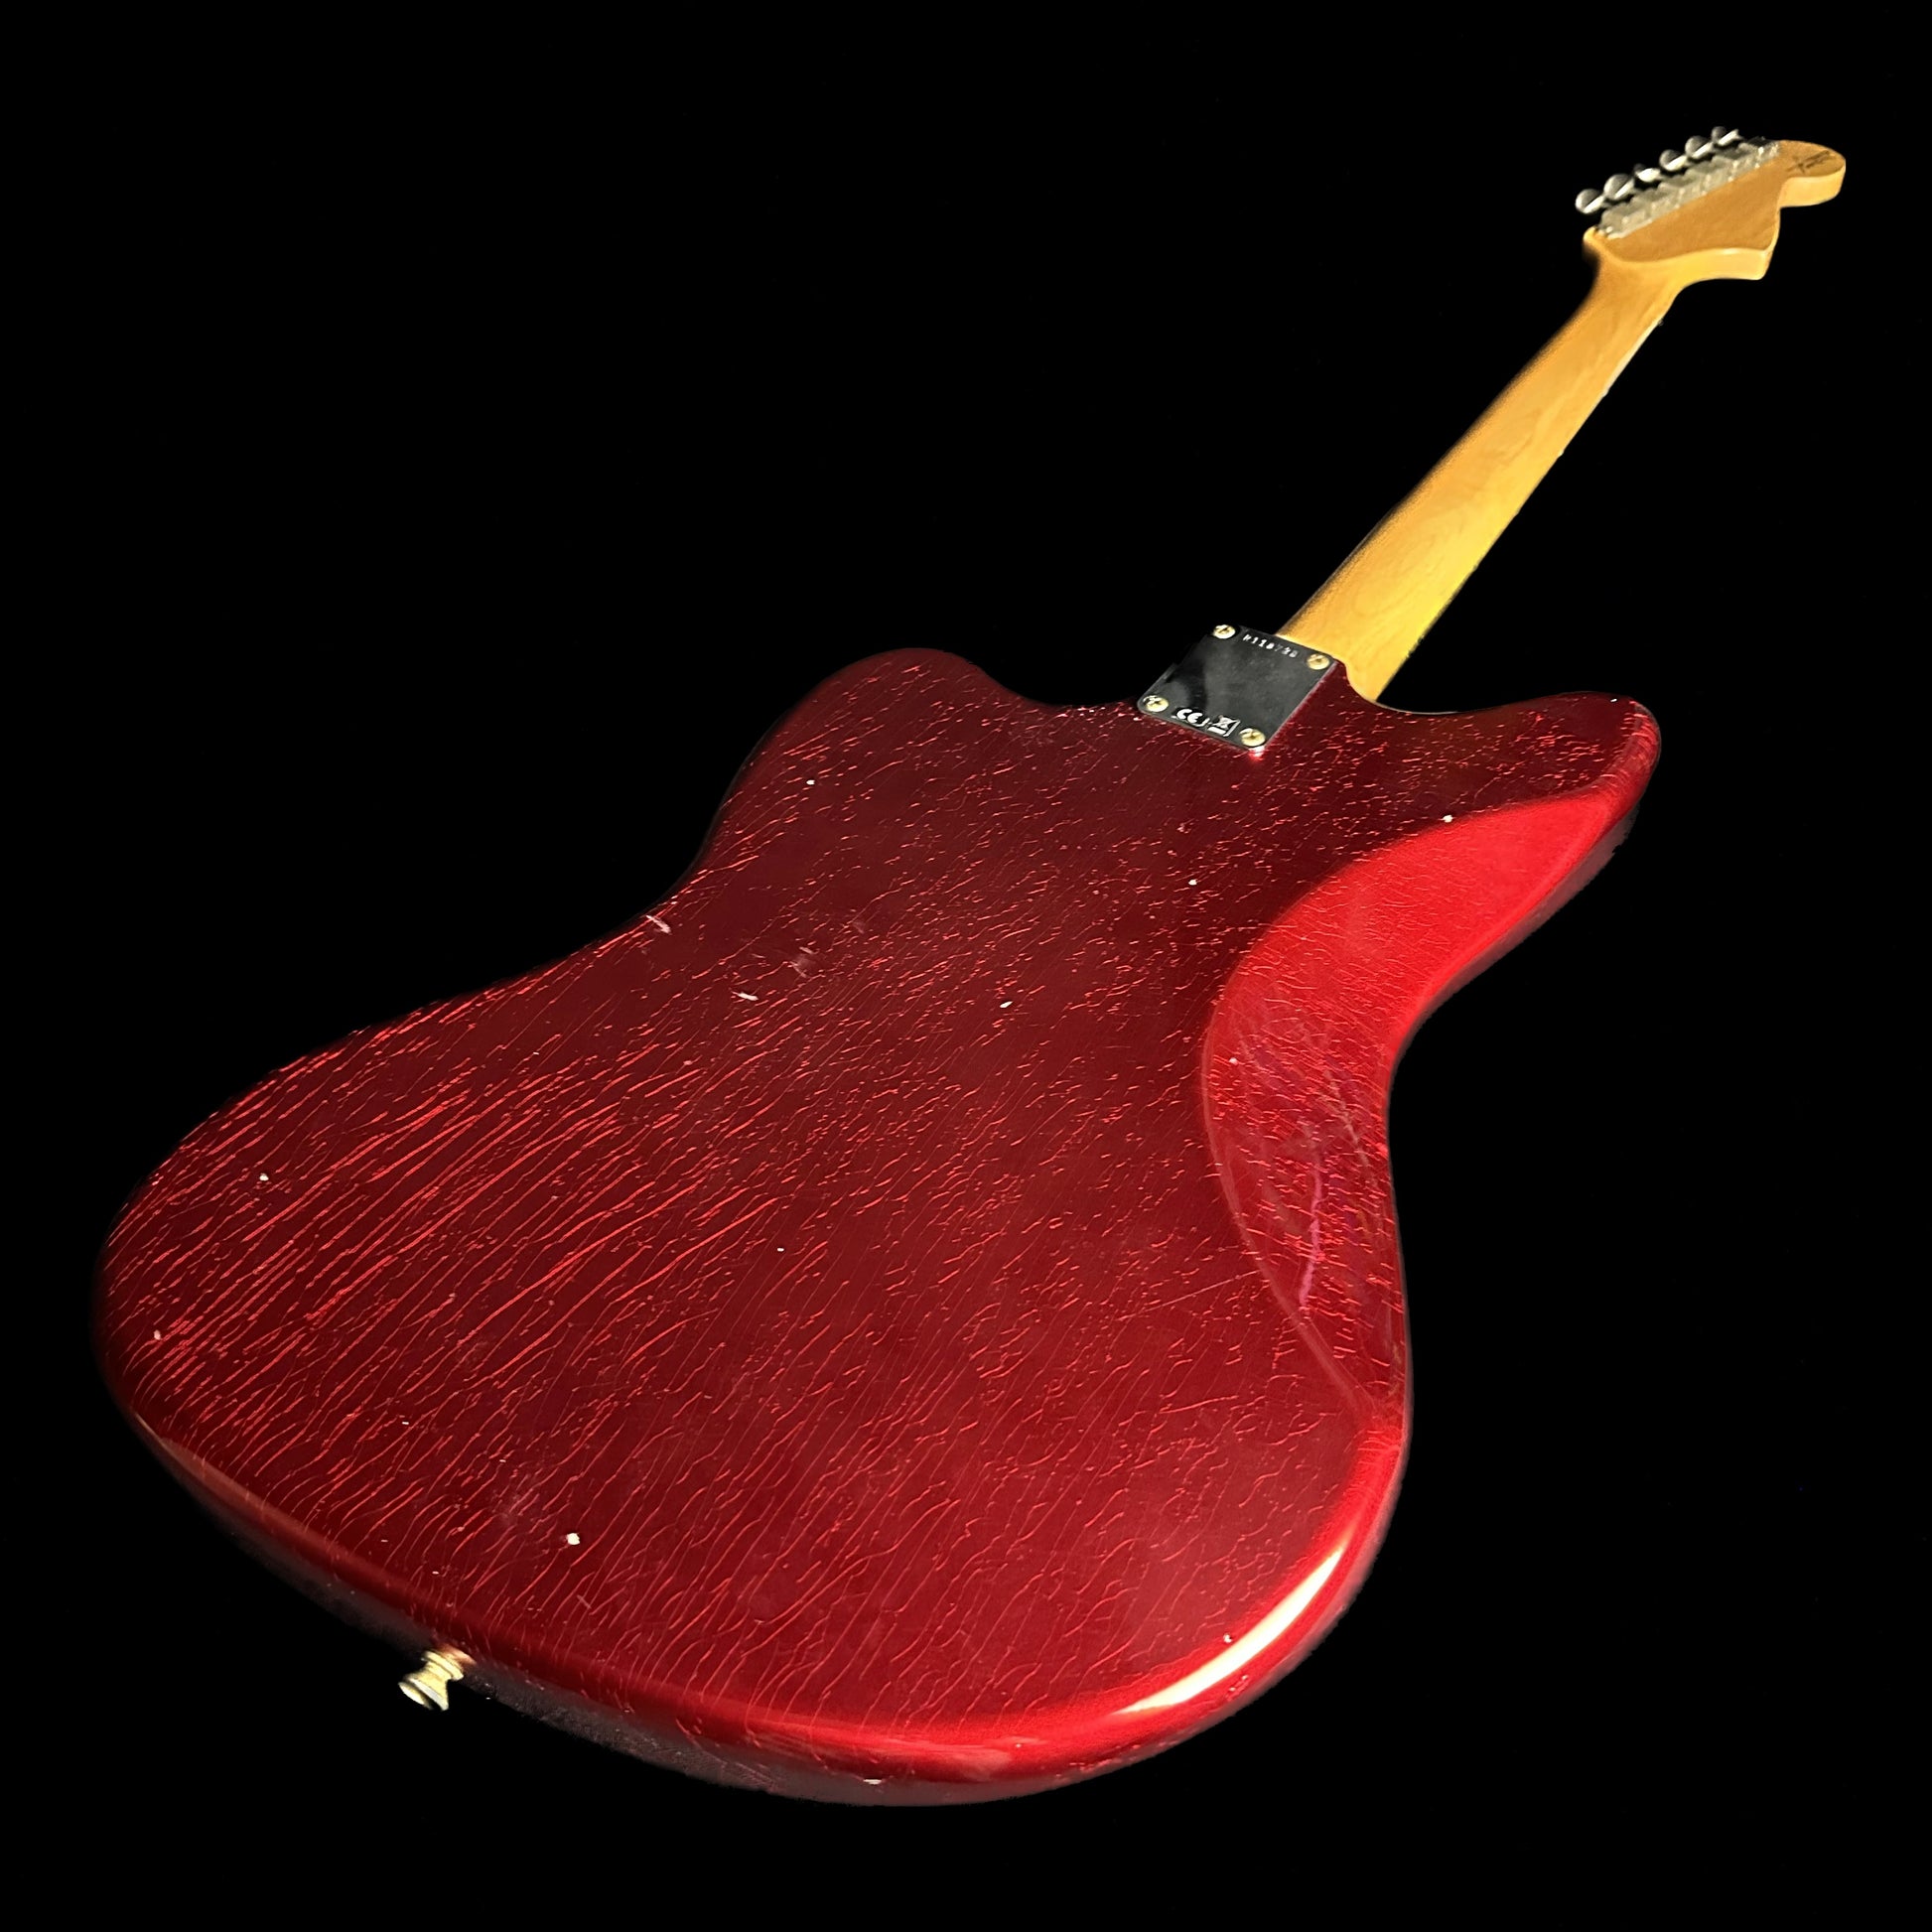 Back angle of Fender Custom Shop 1962 Jazzmaster Journeyman Relic Aged Candy Apple Red Reverse Headstock.